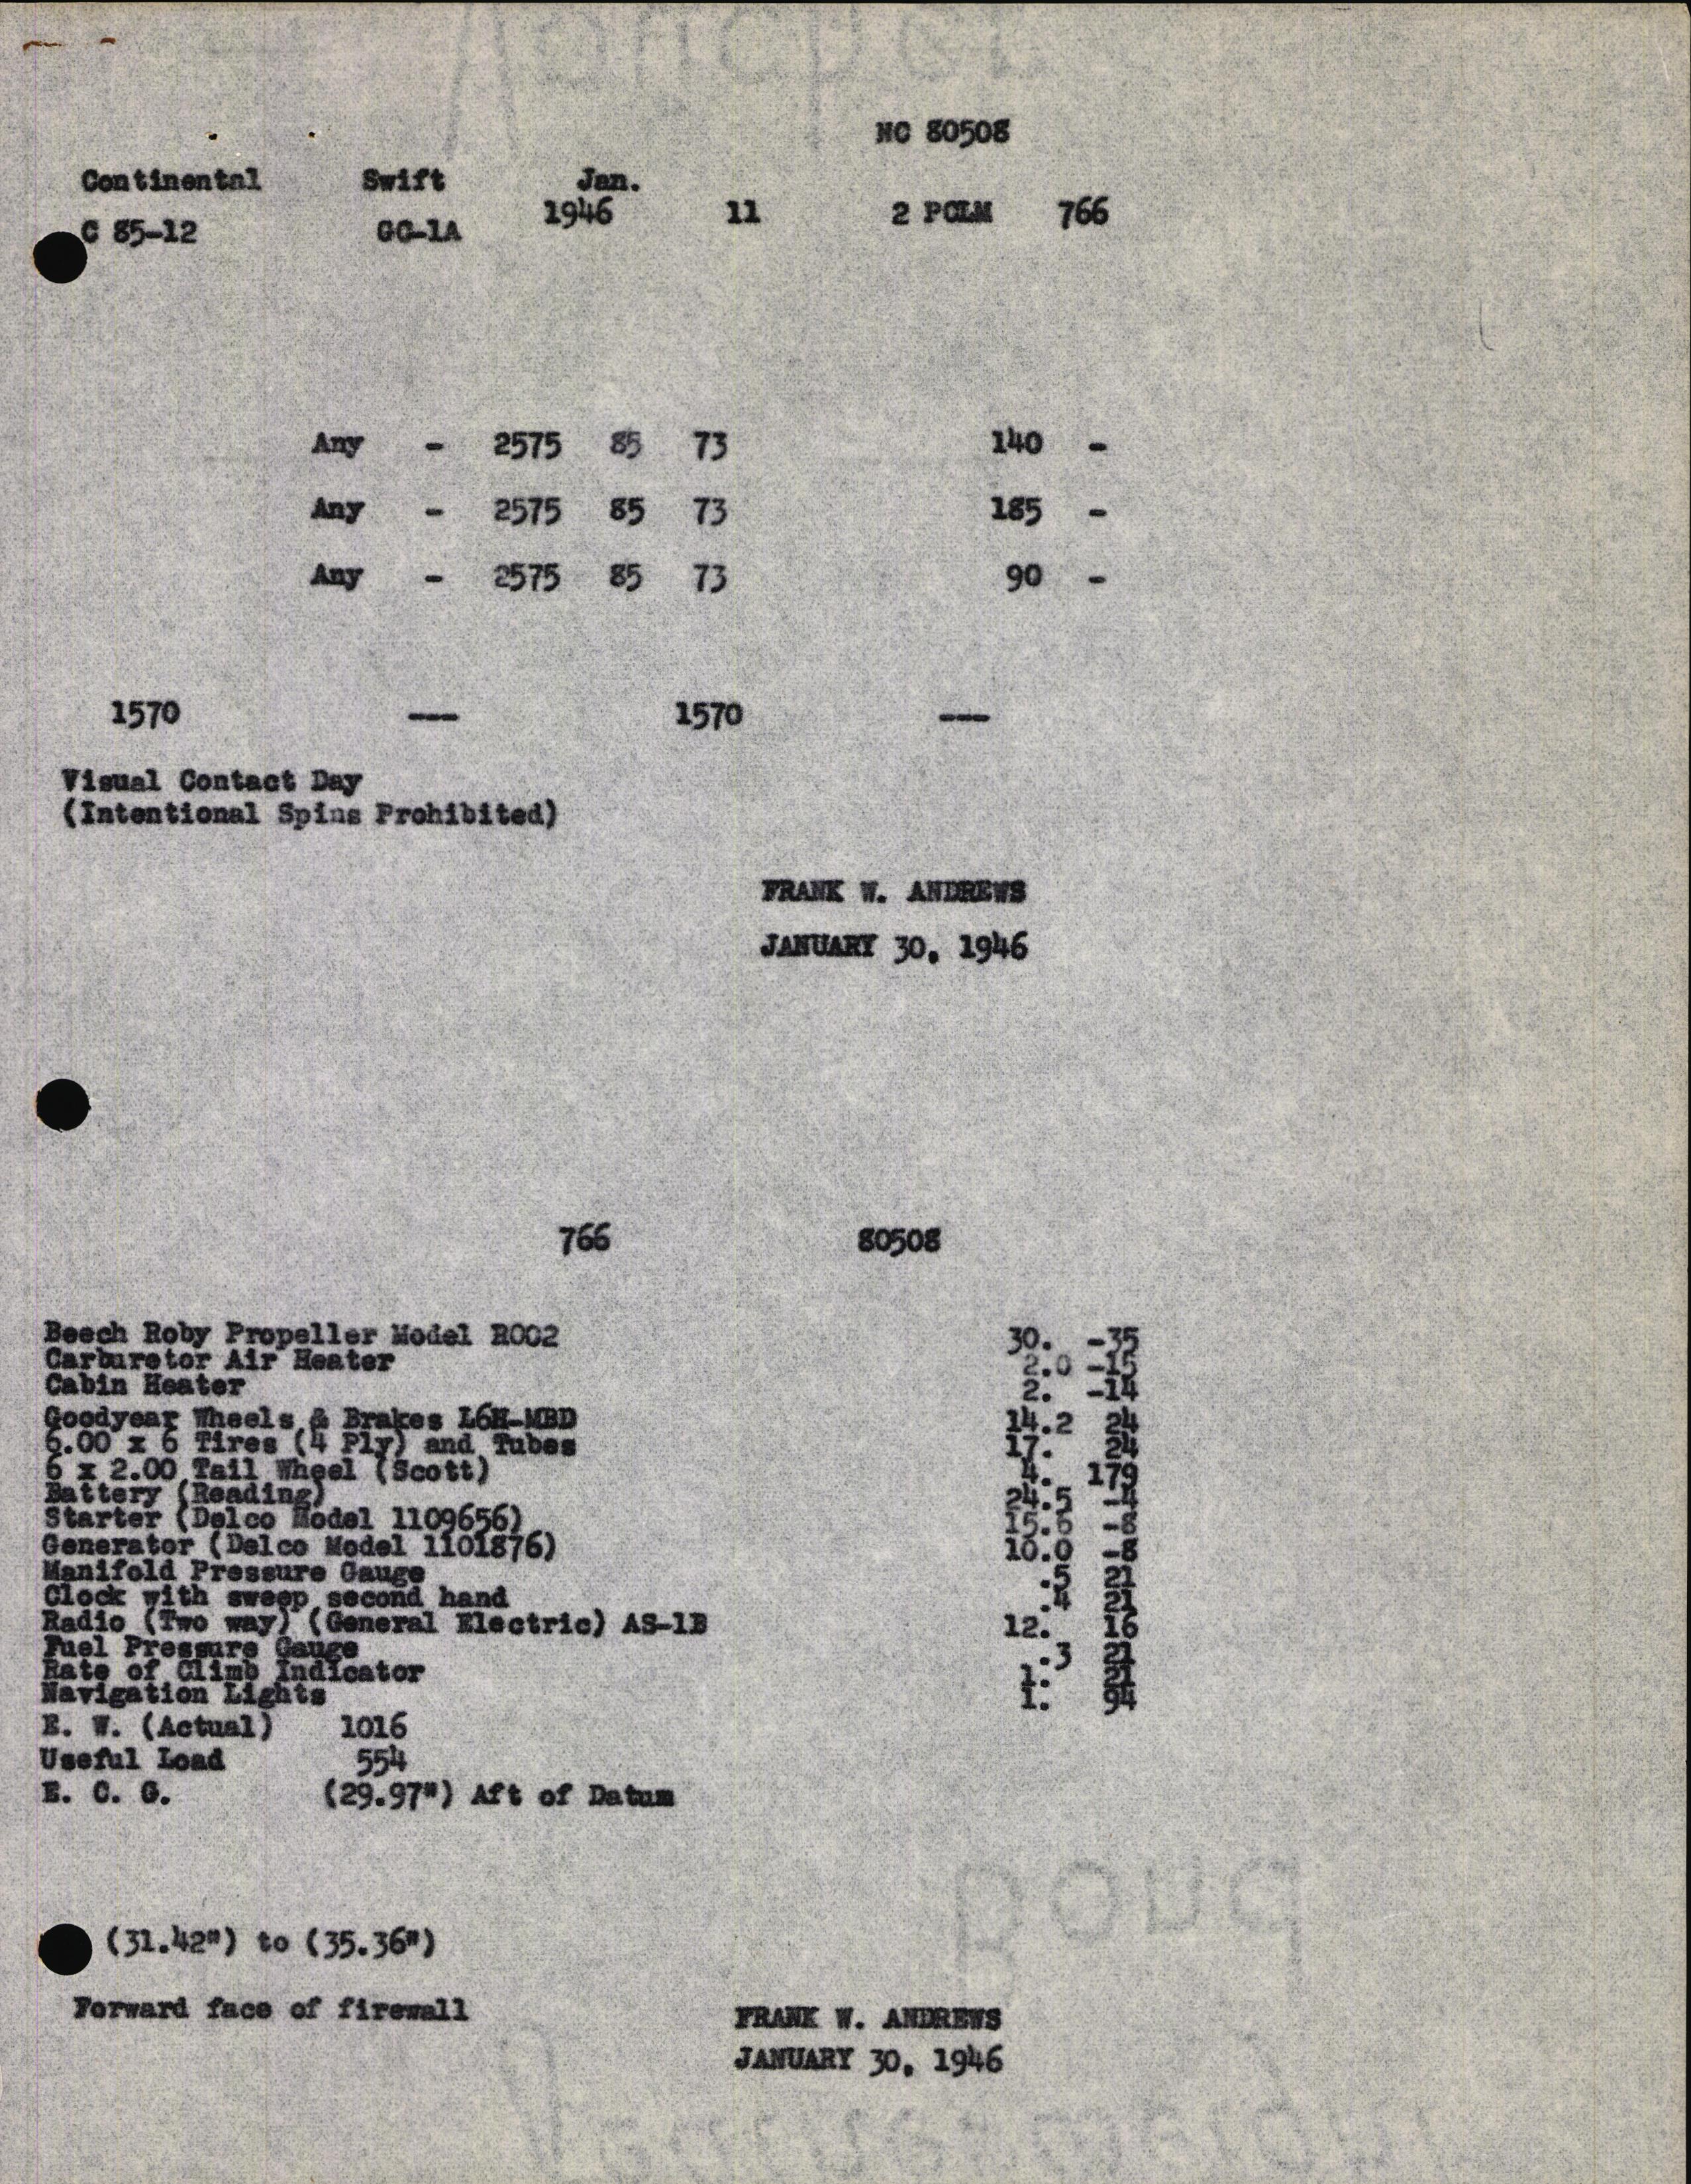 Sample page 5 from AirCorps Library document: Technical Information for Serial Number 11